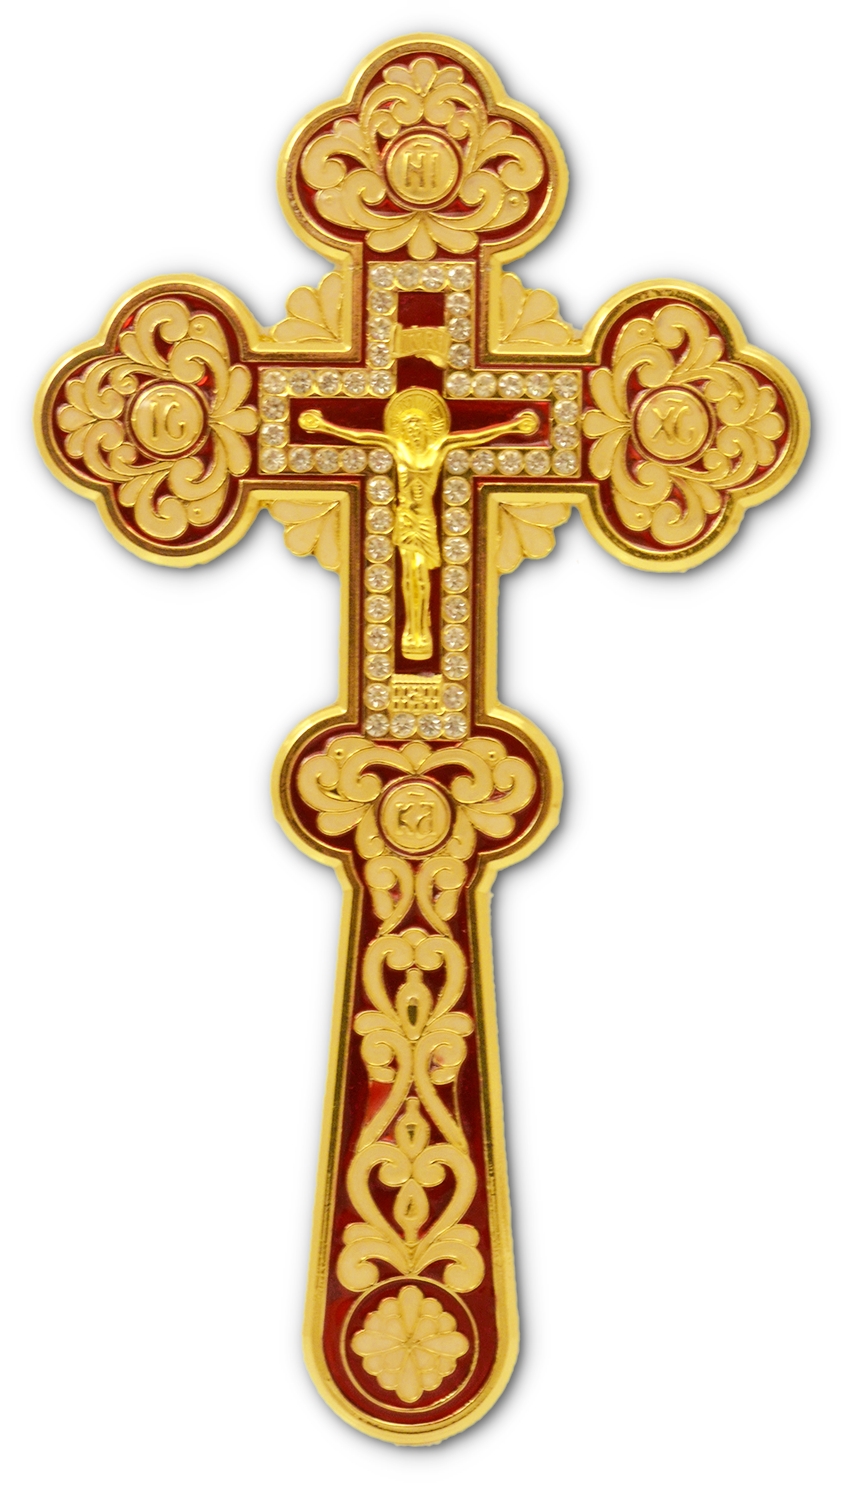 Orthodox Blessing Cross Enamel Red Coloring With Stones Gold Plated 10x22cm